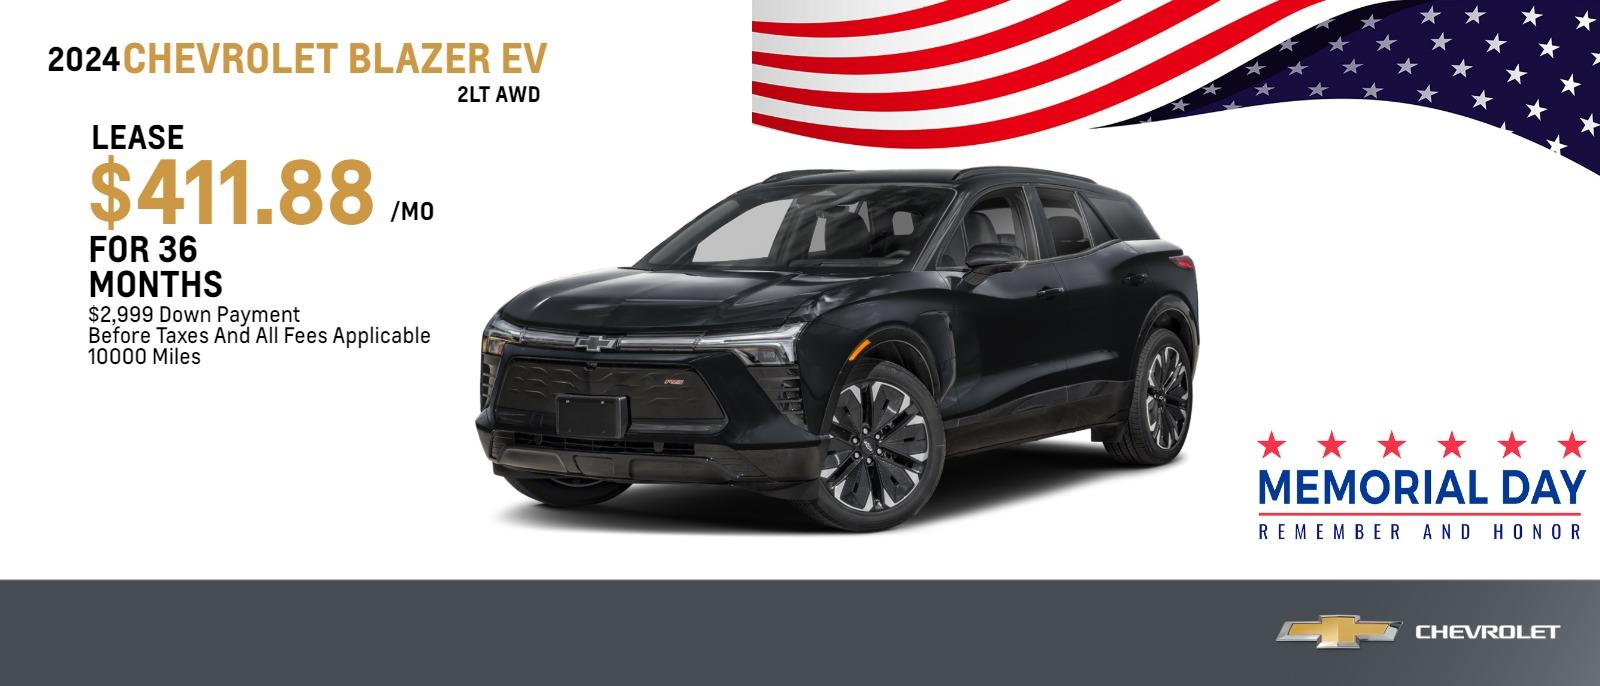 2024 CHEVROLET BLAZER EV 2LT AWD
$5,000 DOWN PAYMENT $351.35/MONTH BEFORE TAXES AND ALL FEES APPLICABLE. 36 MONTHS 10000 MILES